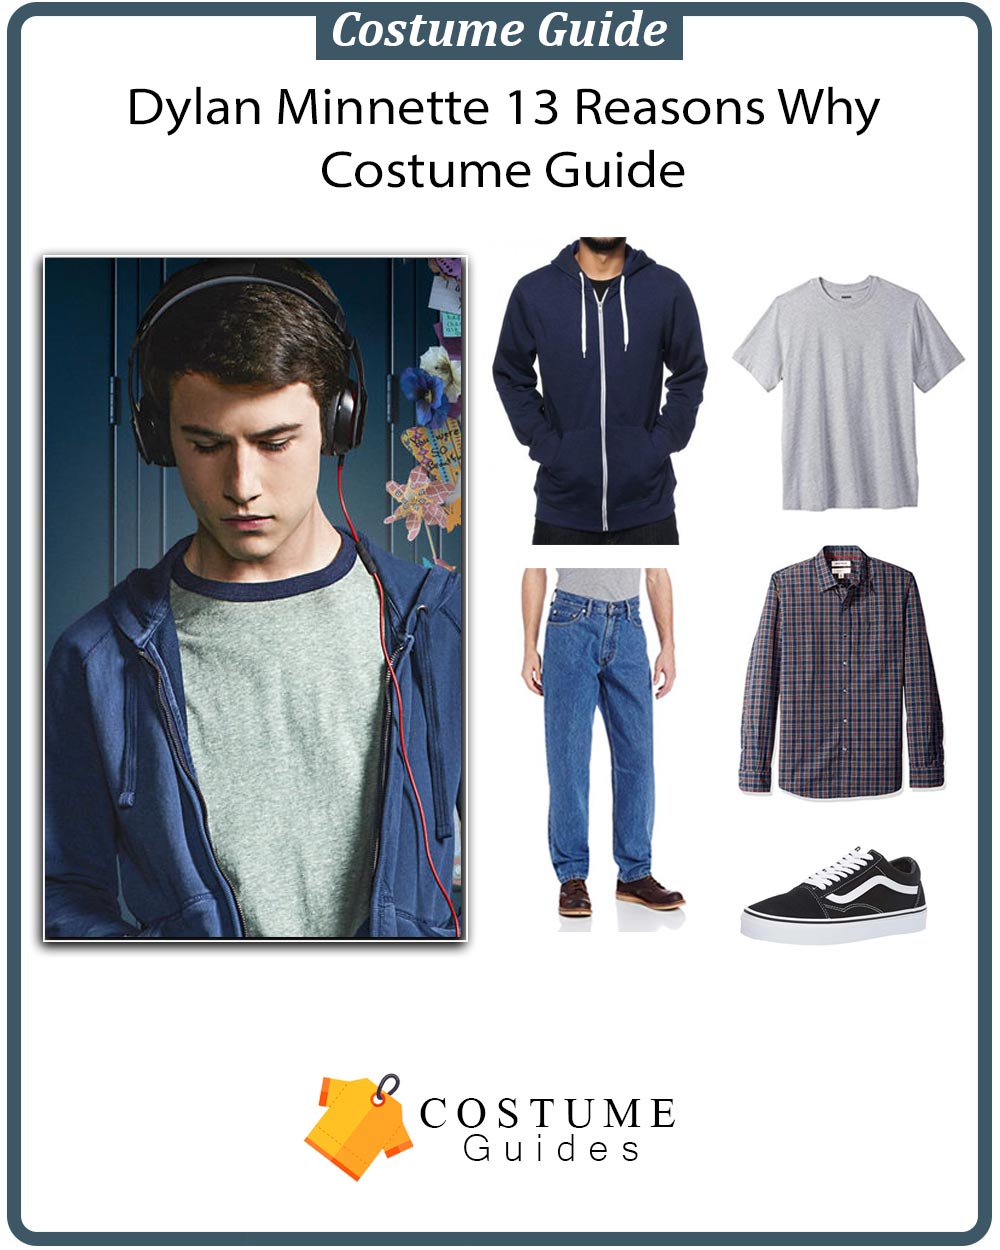 Dylan Minnette 13 Reasons Why Costume Guide